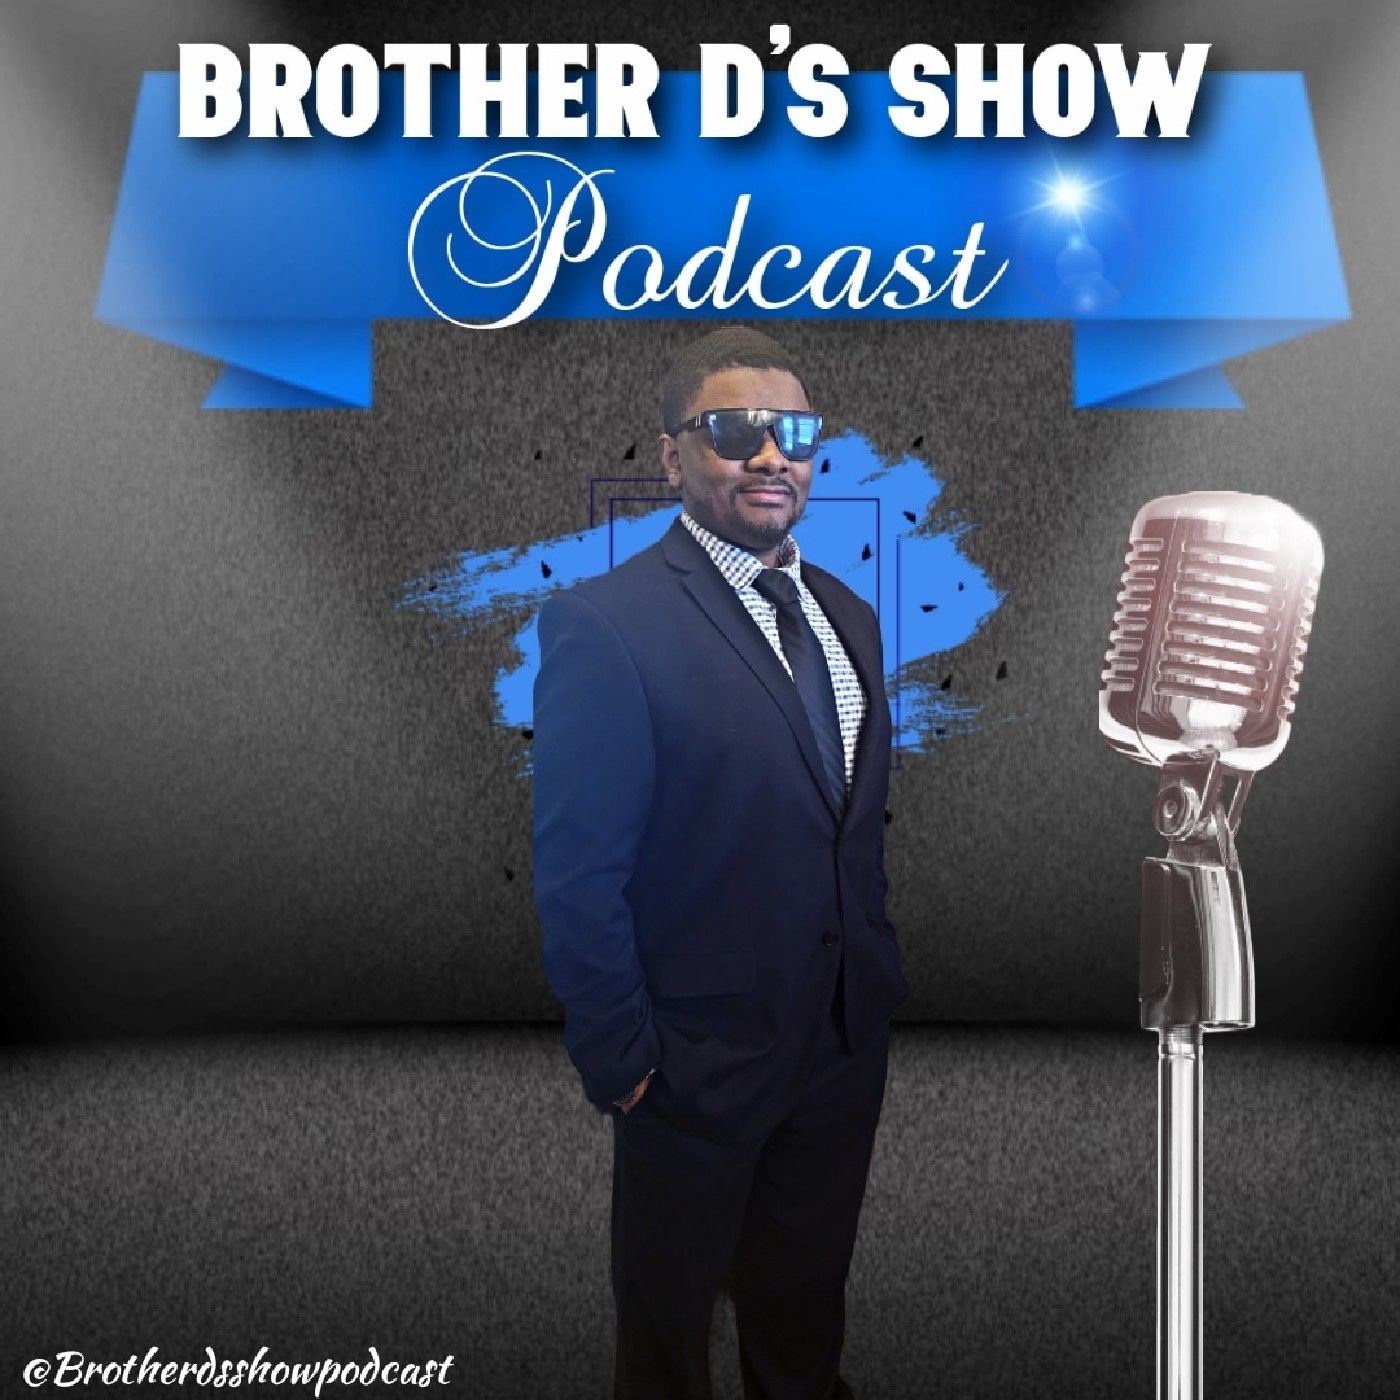 Brother D’s Show Podcast